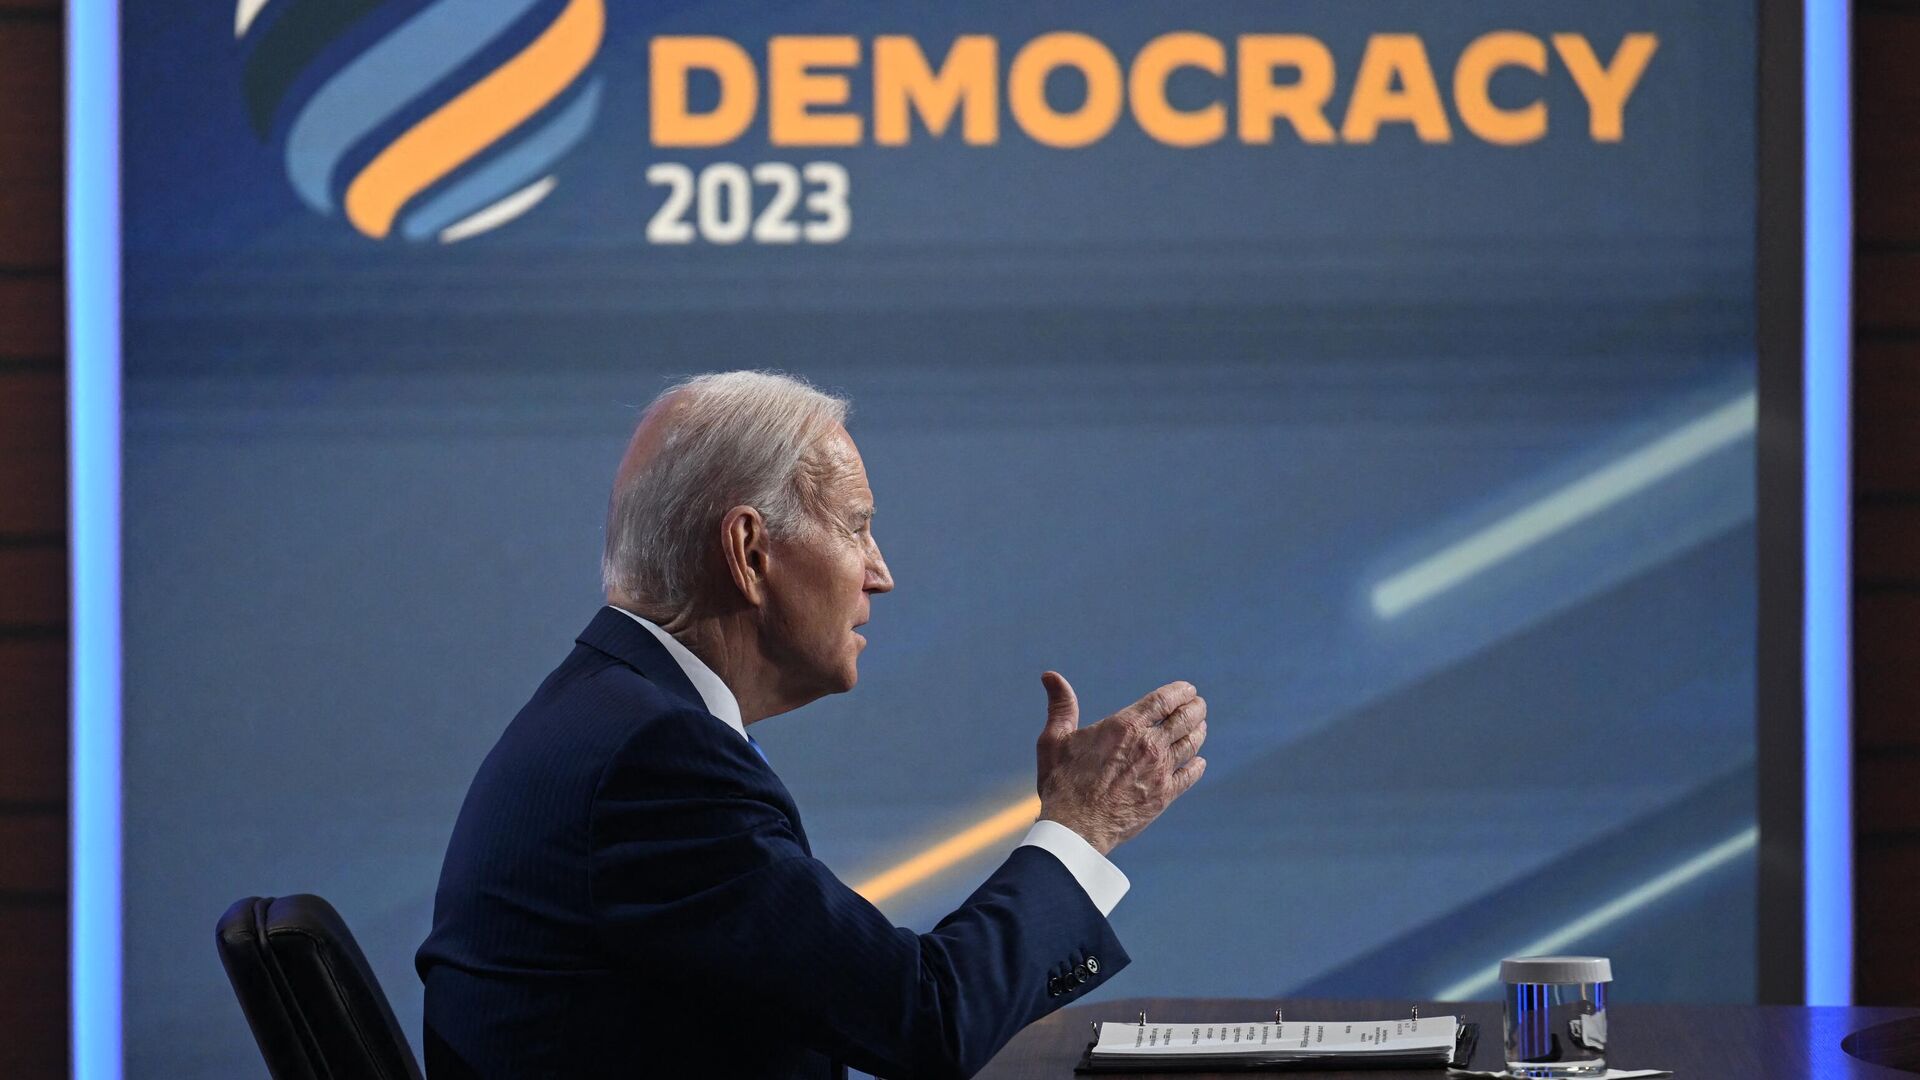 US President Joe Biden speaks during the Summit for Democracy virtual plenary on Democracy in the Face of Global Challenges in the South Court Auditorium of the White House in Washington, DC, March 29, 2023. - Sputnik International, 1920, 31.03.2023